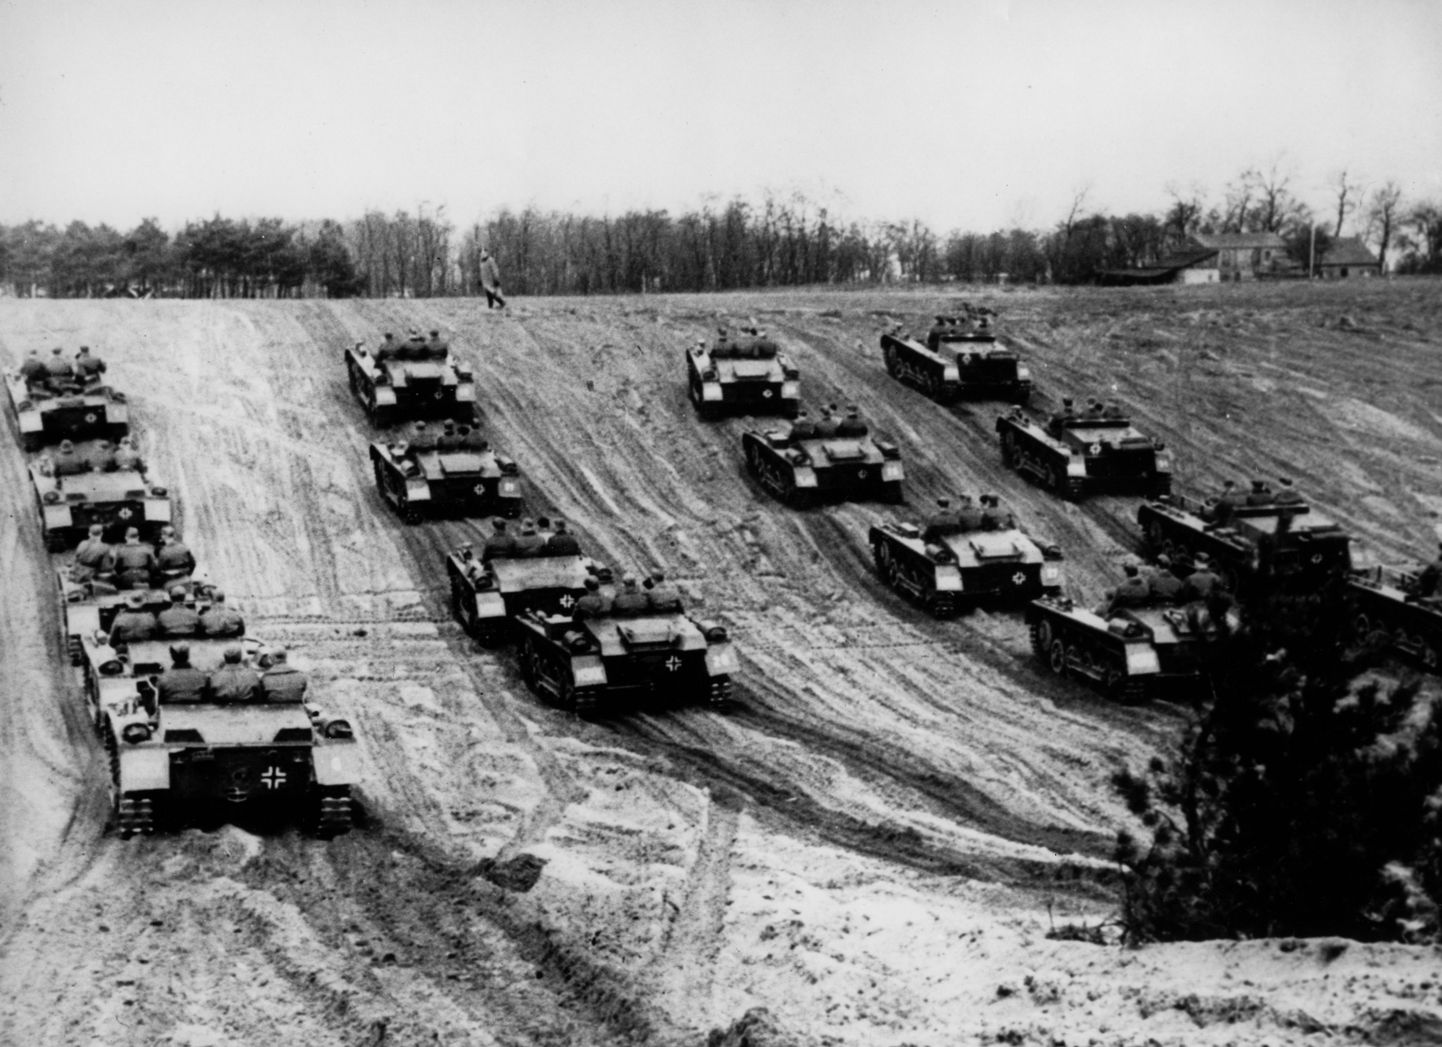 According to the German caption on this picture it shows German tanks taking part in exercises " somewhere in France " 18 May 1944